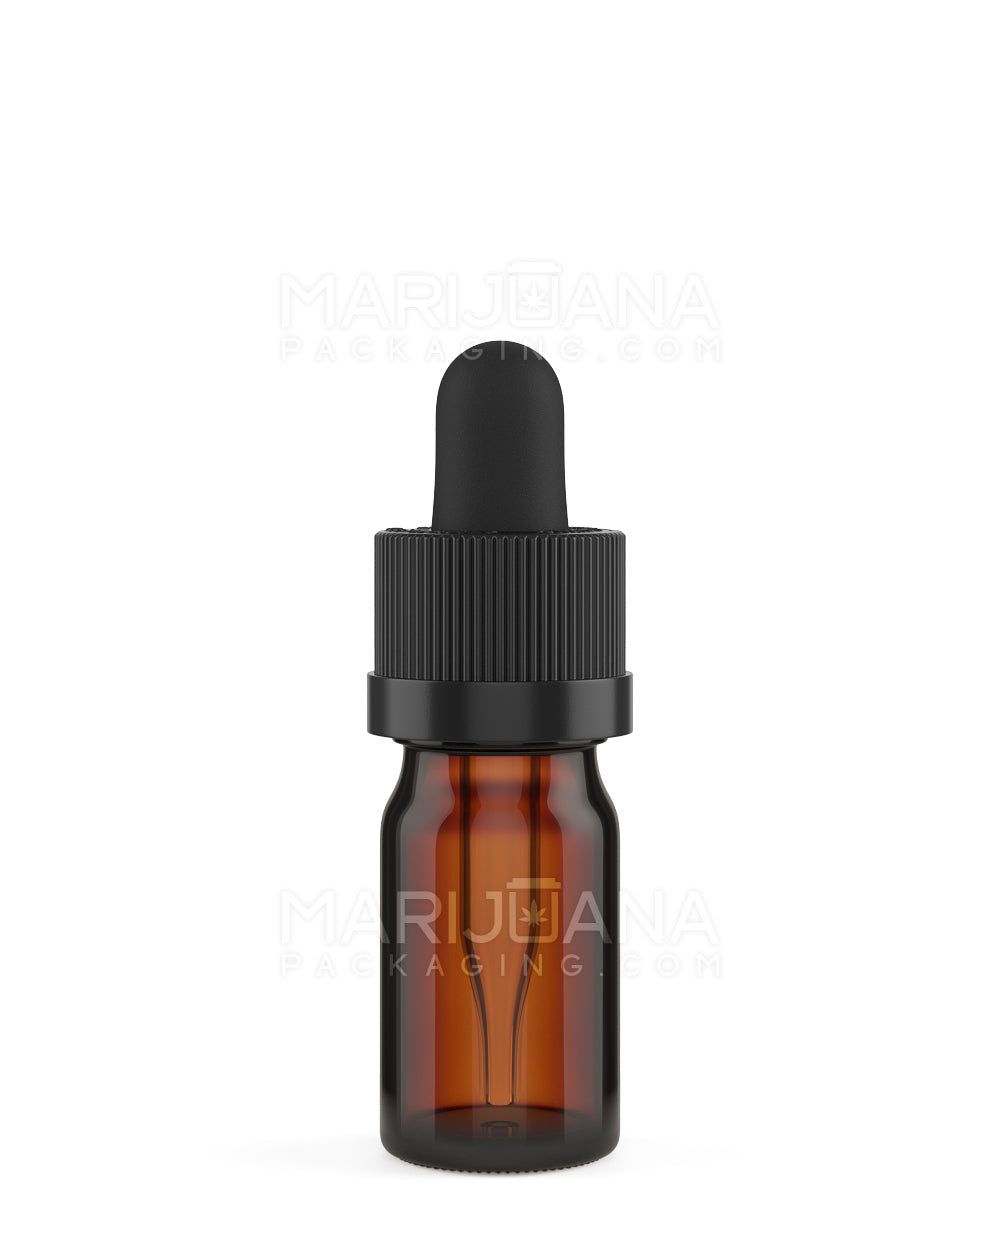 Child Resistant | Glass Tincture Bottles w/ Black Ribbed Dropper Cap | 5mL - Amber - 120 Count - 2